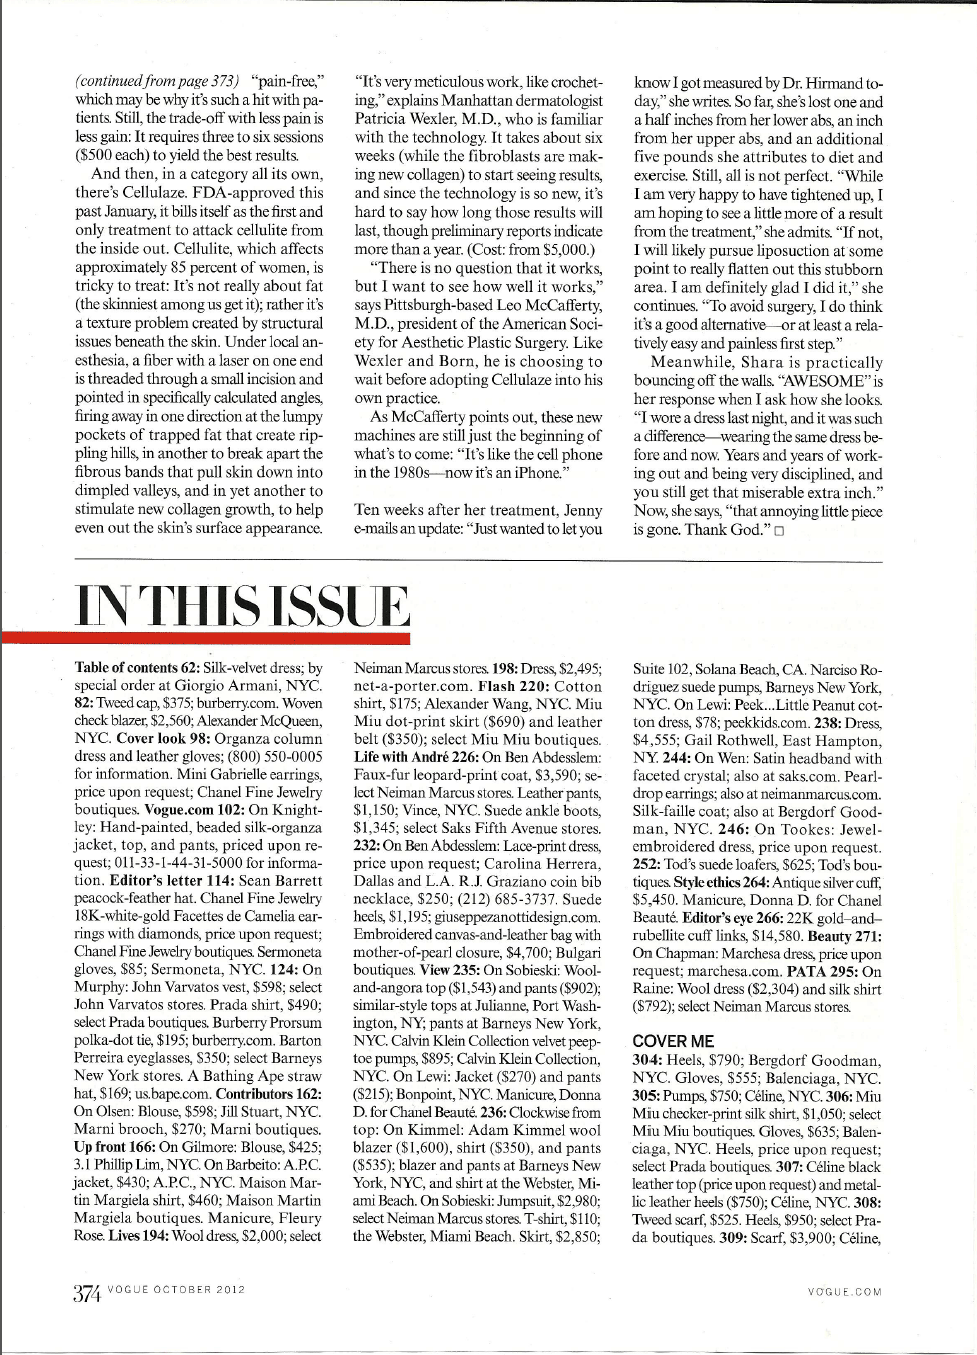 coolsculpting in vogue magazine 5